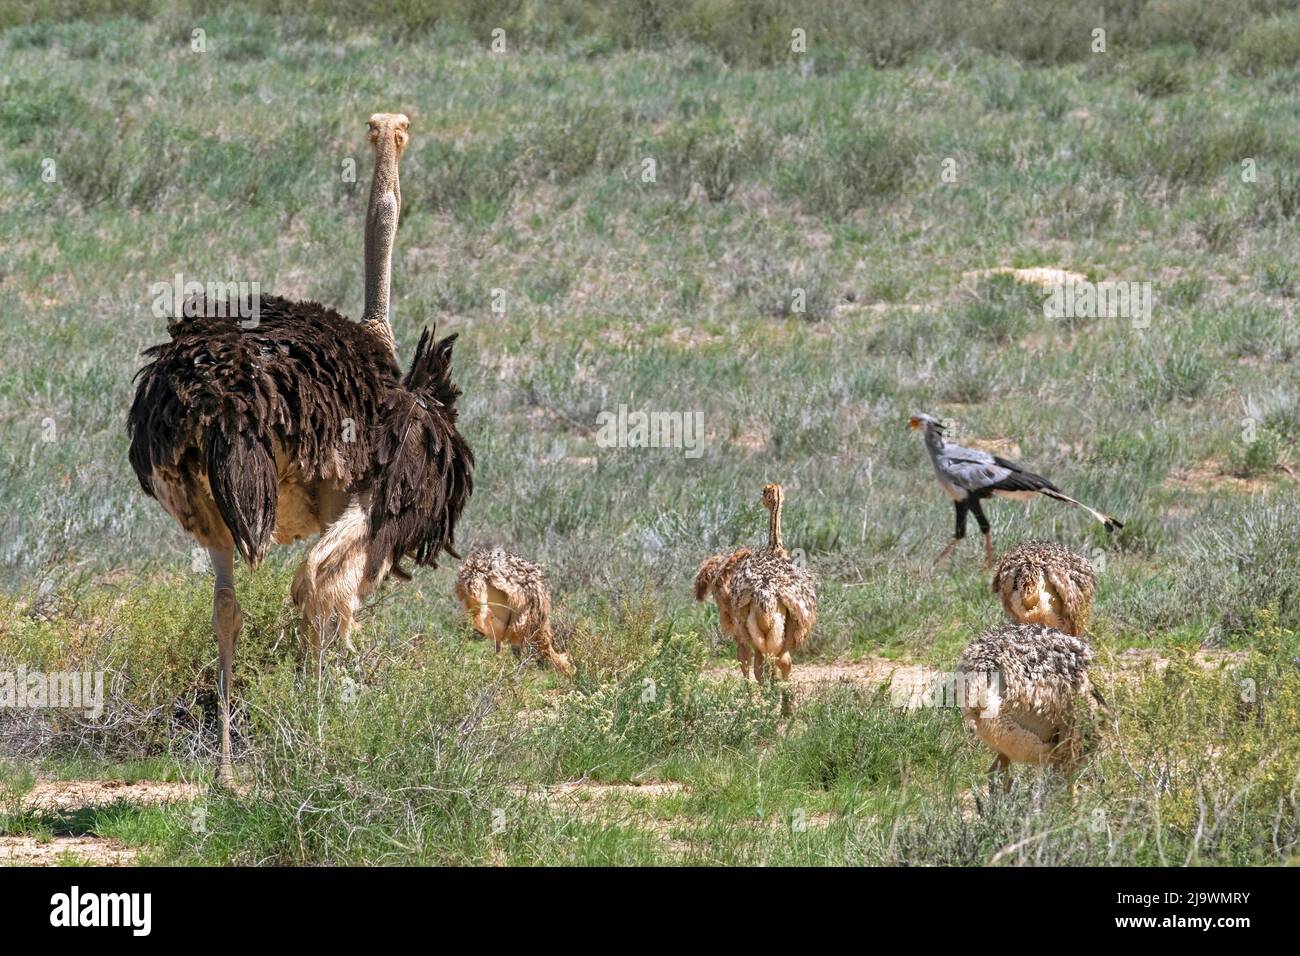 Common ostrich (Struthio camelus) female with juveniles in the Kalahari Desert, Kgalagadi Transfrontier Park, Northern Cape province, South Africa Stock Photo